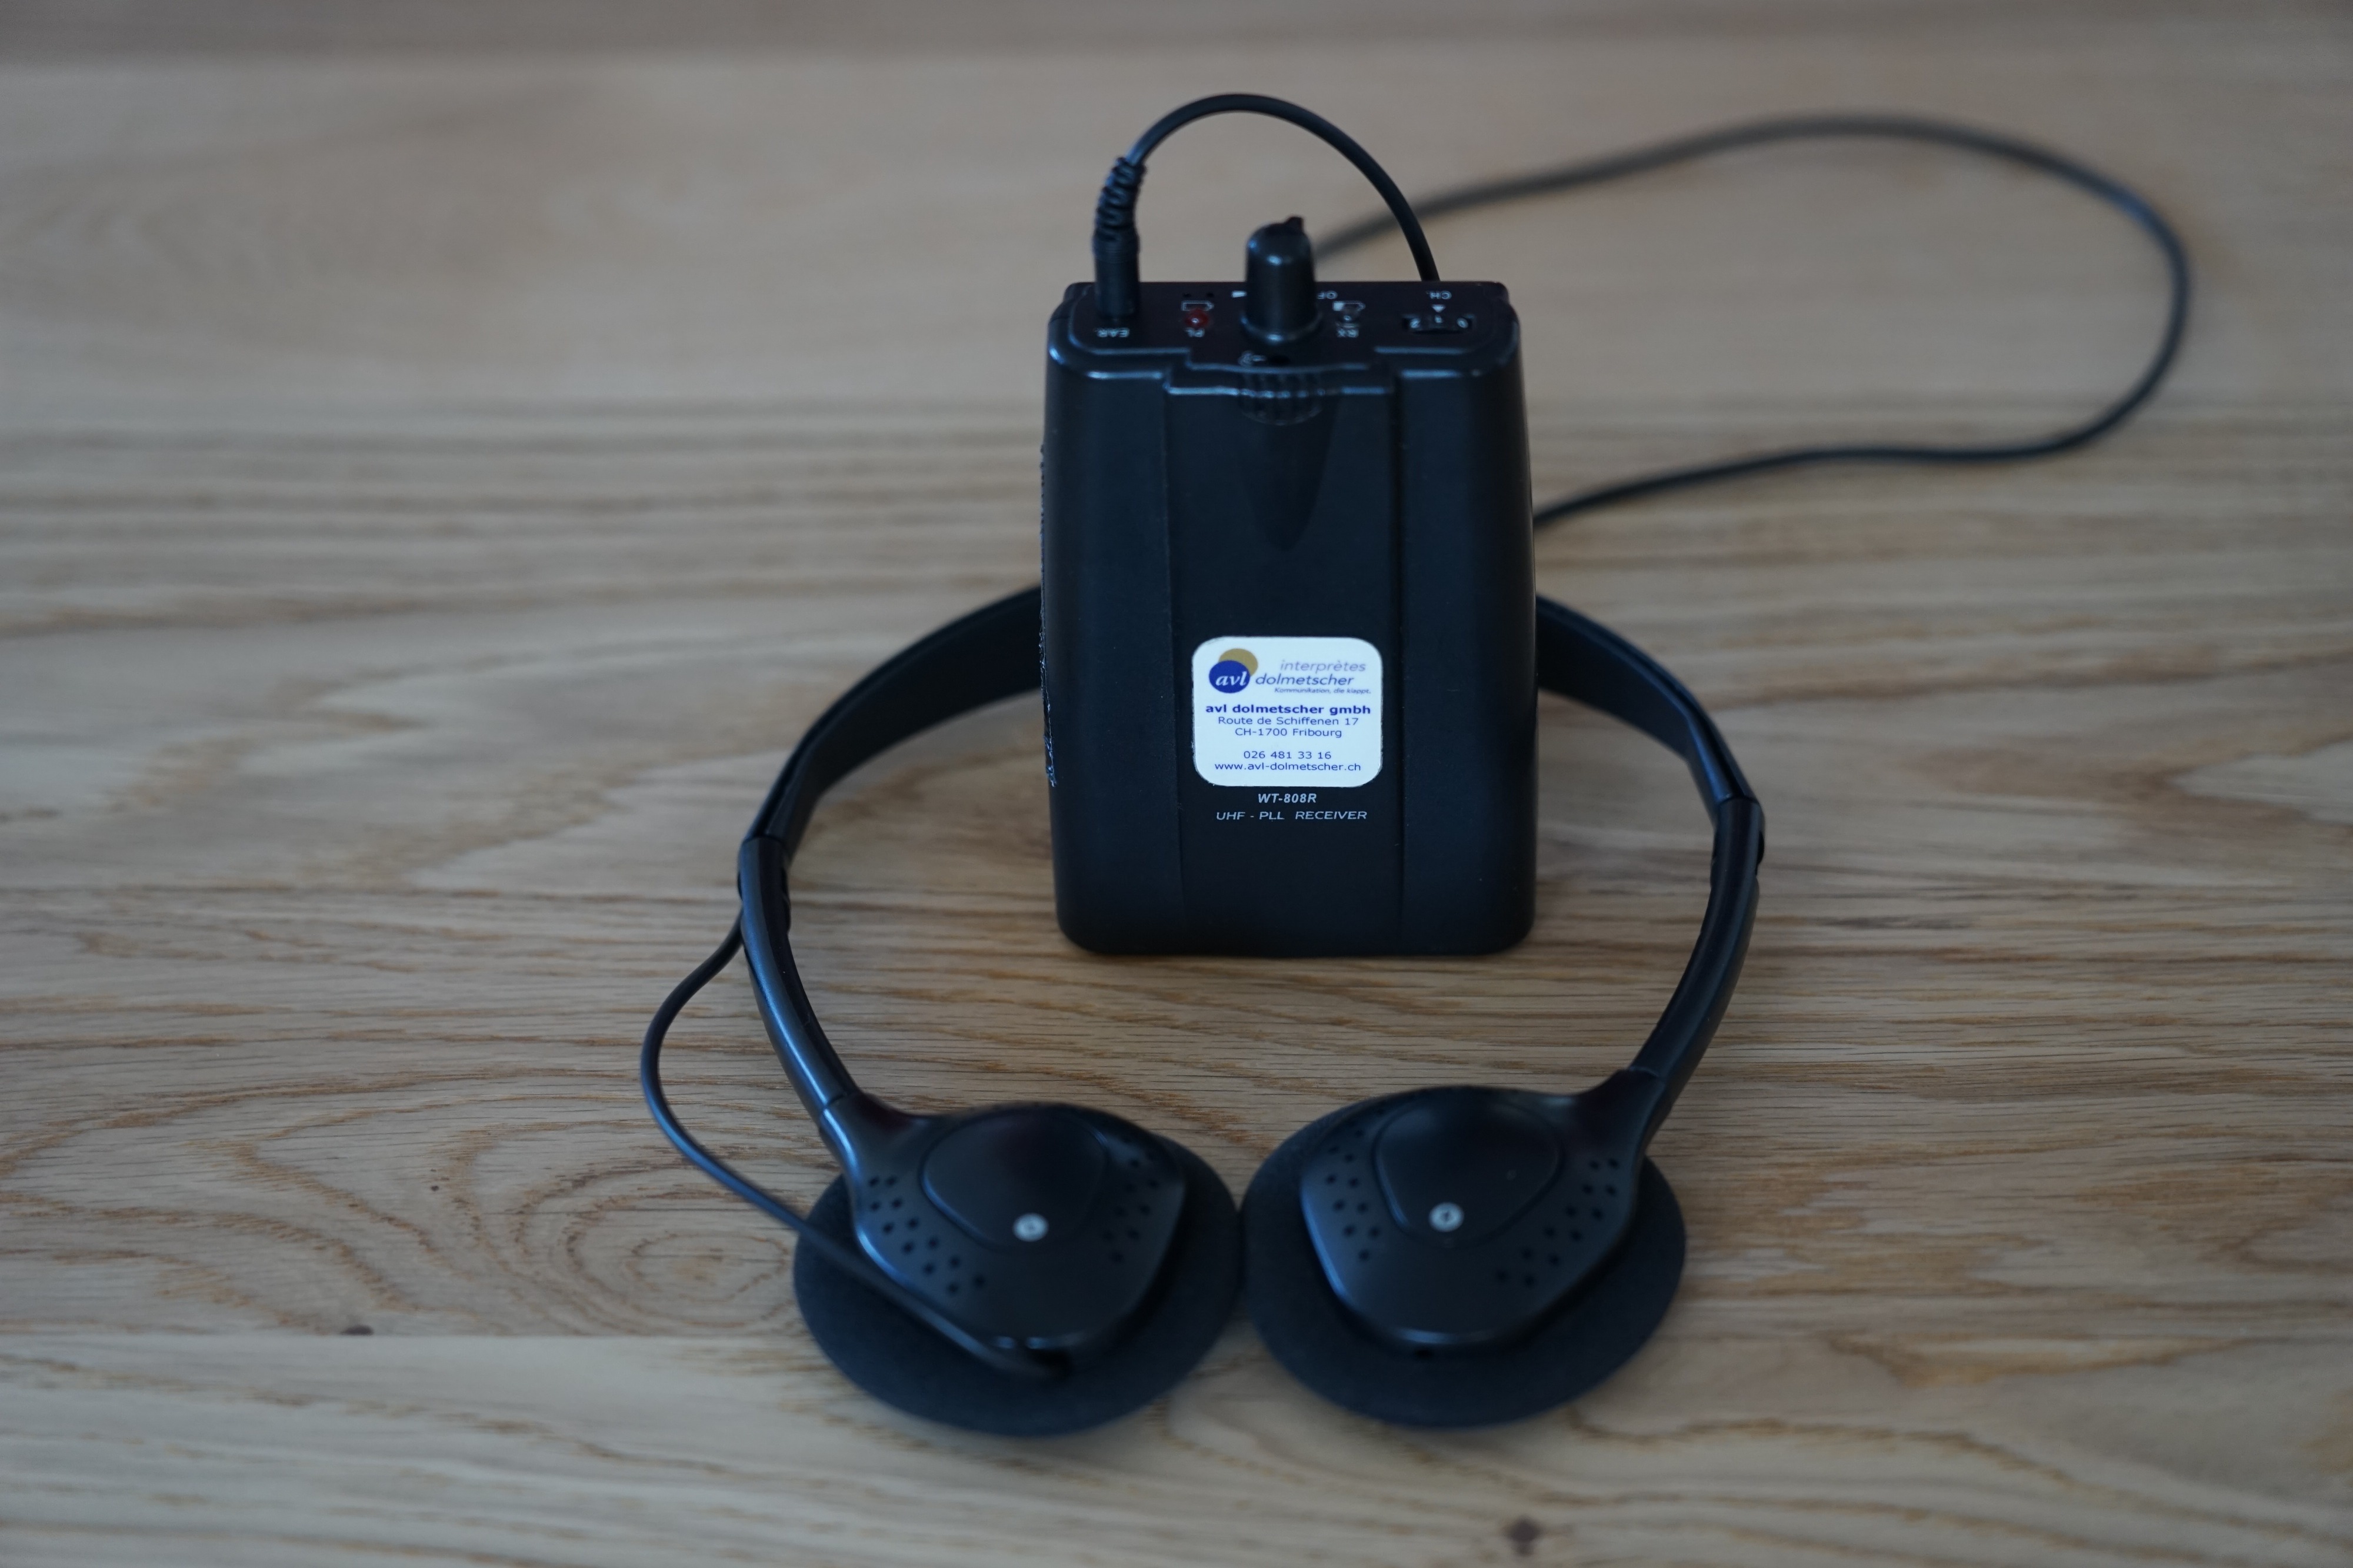 The transmitter includes a headset microphone. The interpreters use this microphone to convey what is being said to the foreign-language audience.